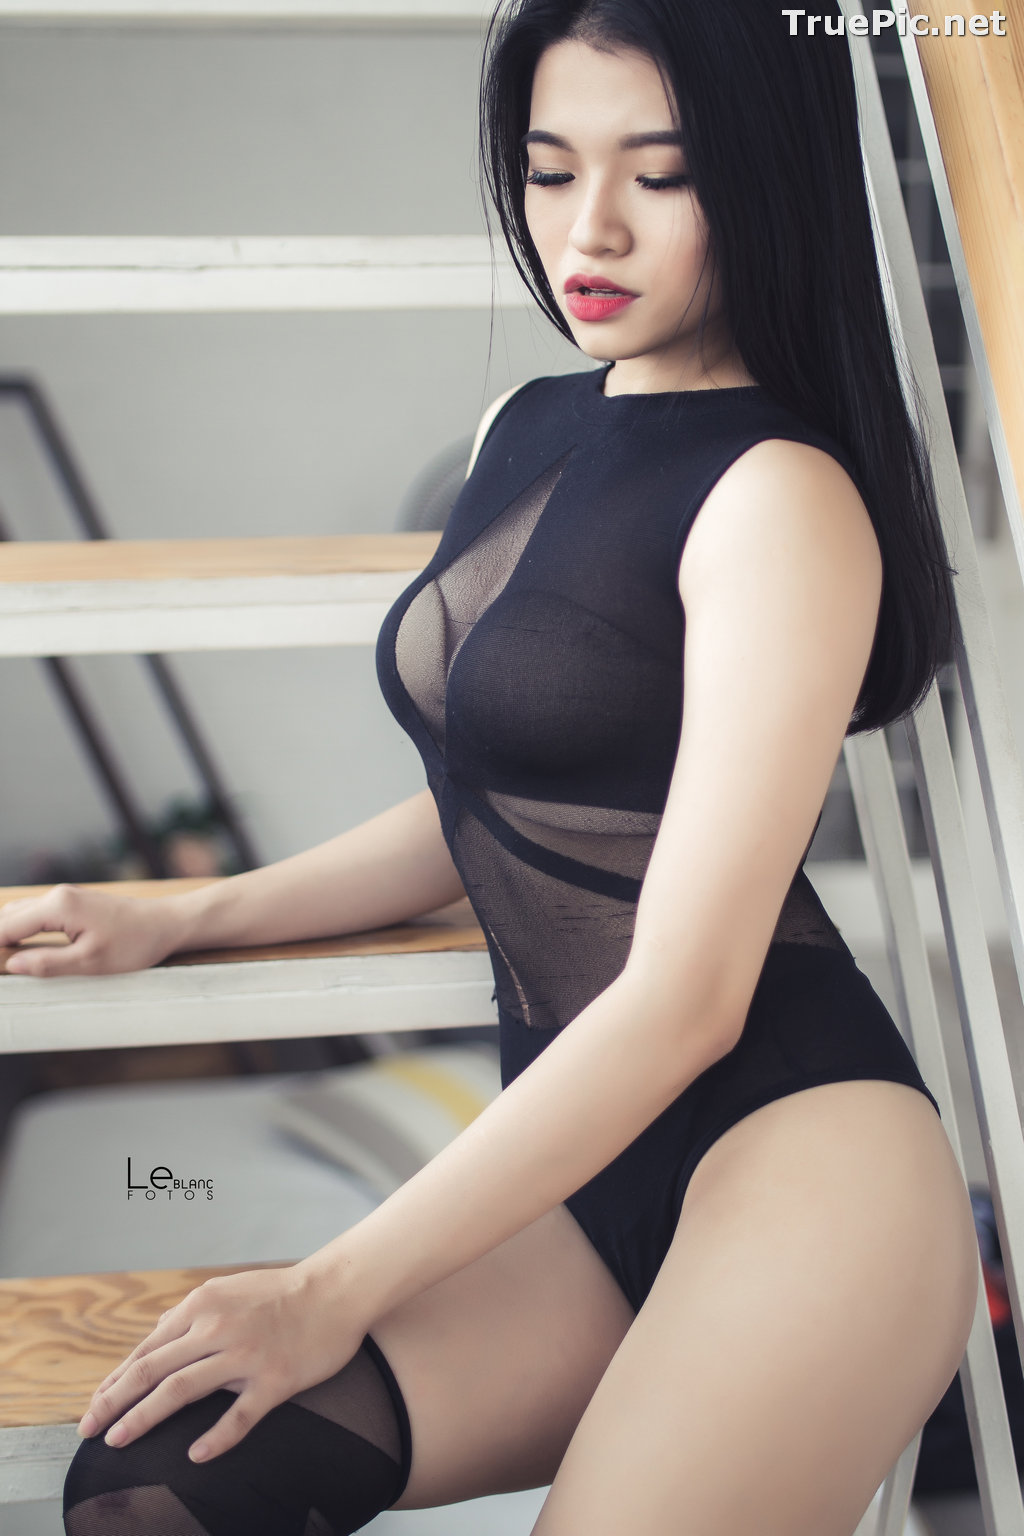 Image Vietnamese Beauties With Lingerie and Bikini – Photo by Le Blanc Studio #12 - TruePic.net - Picture-42